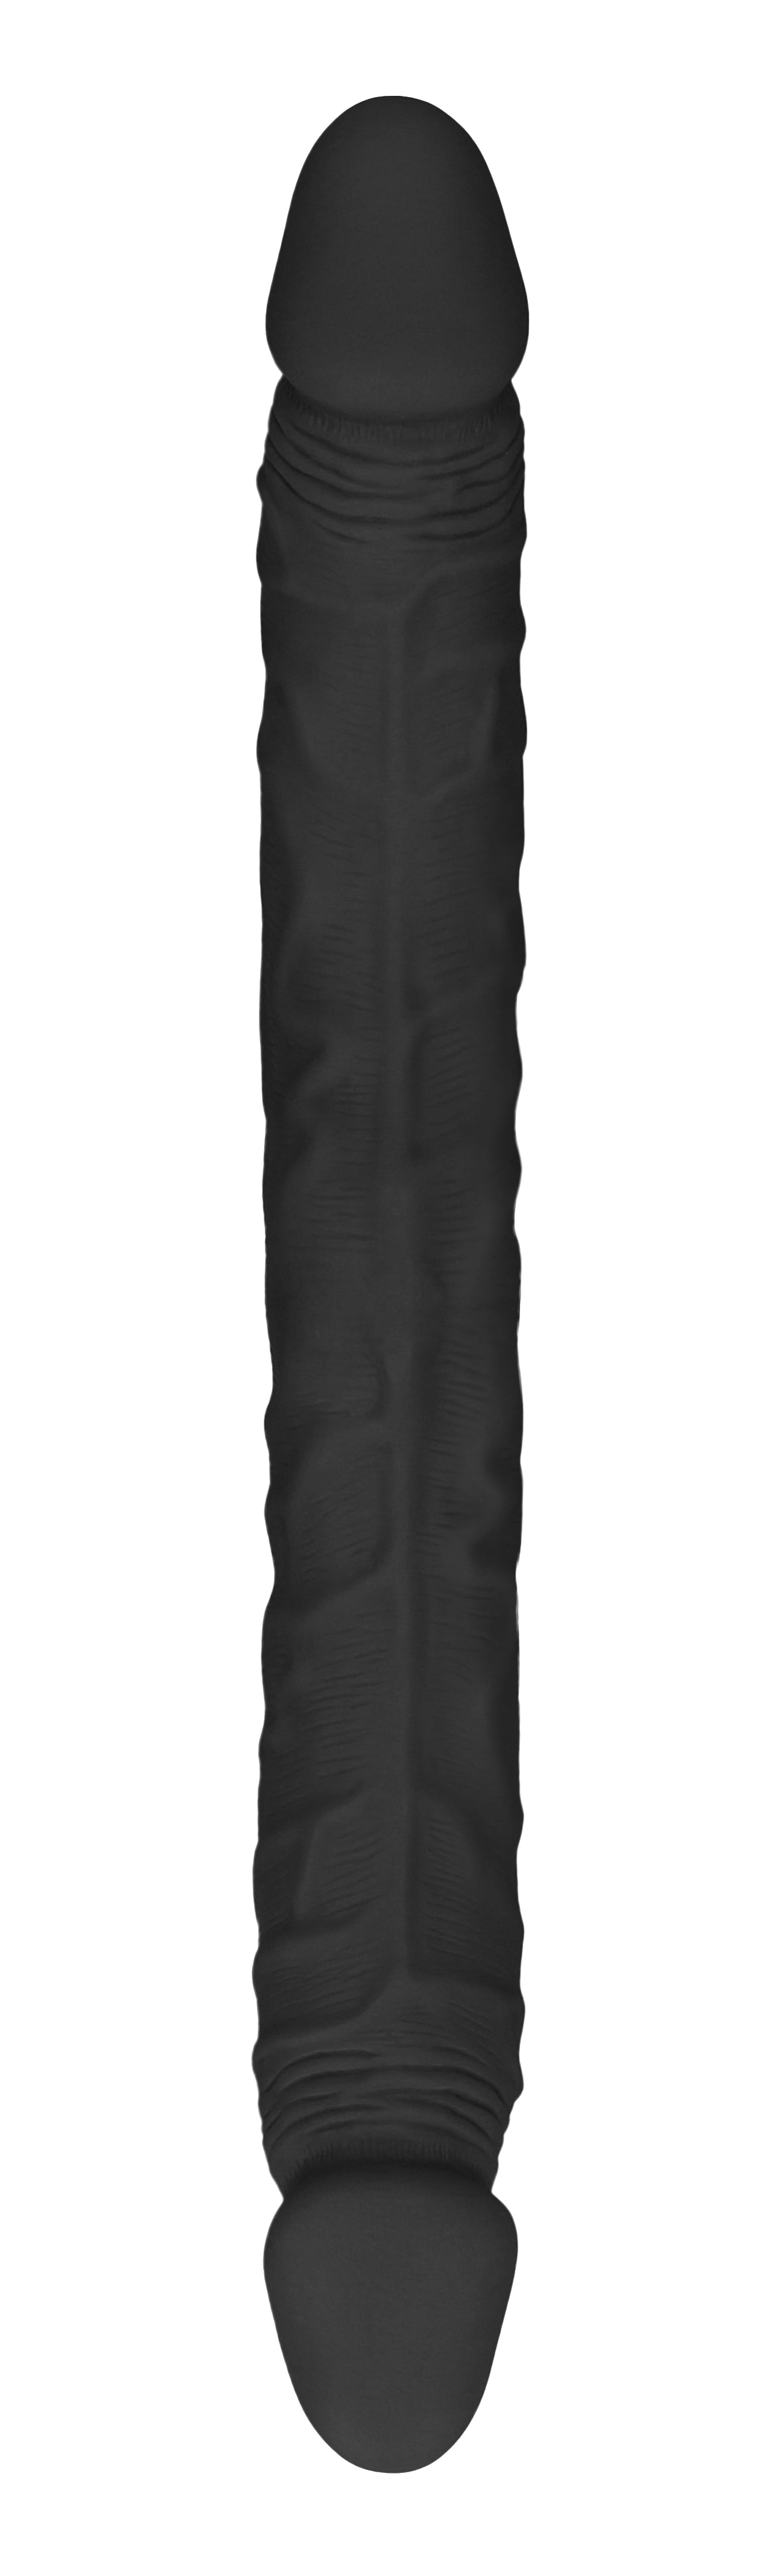 18 Inch Double Dong - Black